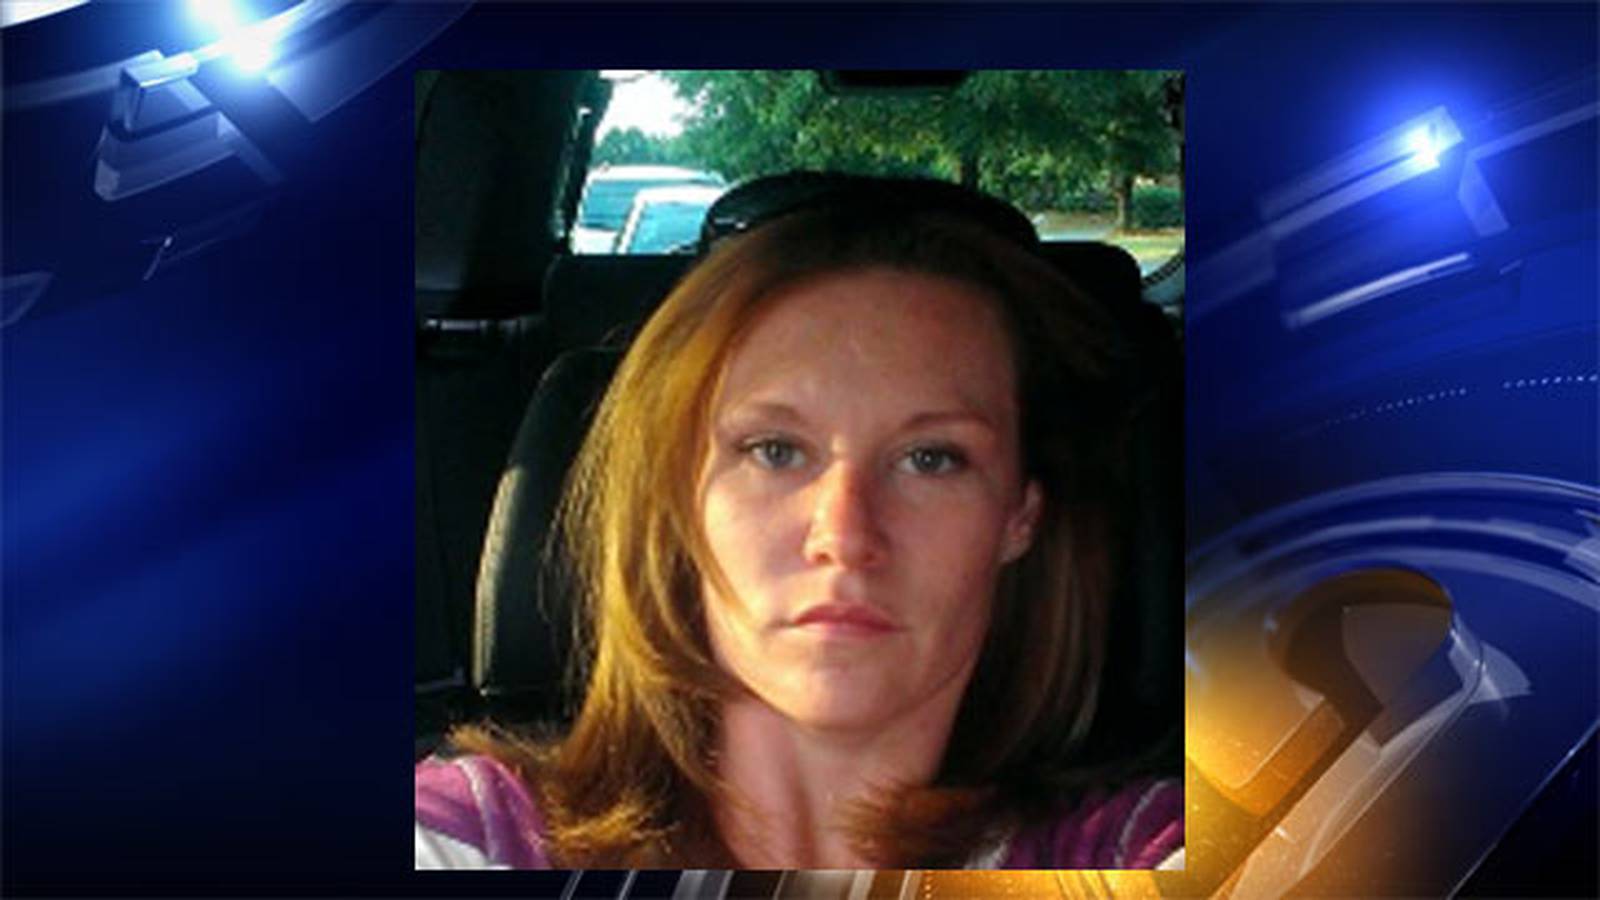 Lincoln Co Asking For Publics Help To Find Missing Woman Wsoc Tv 6880